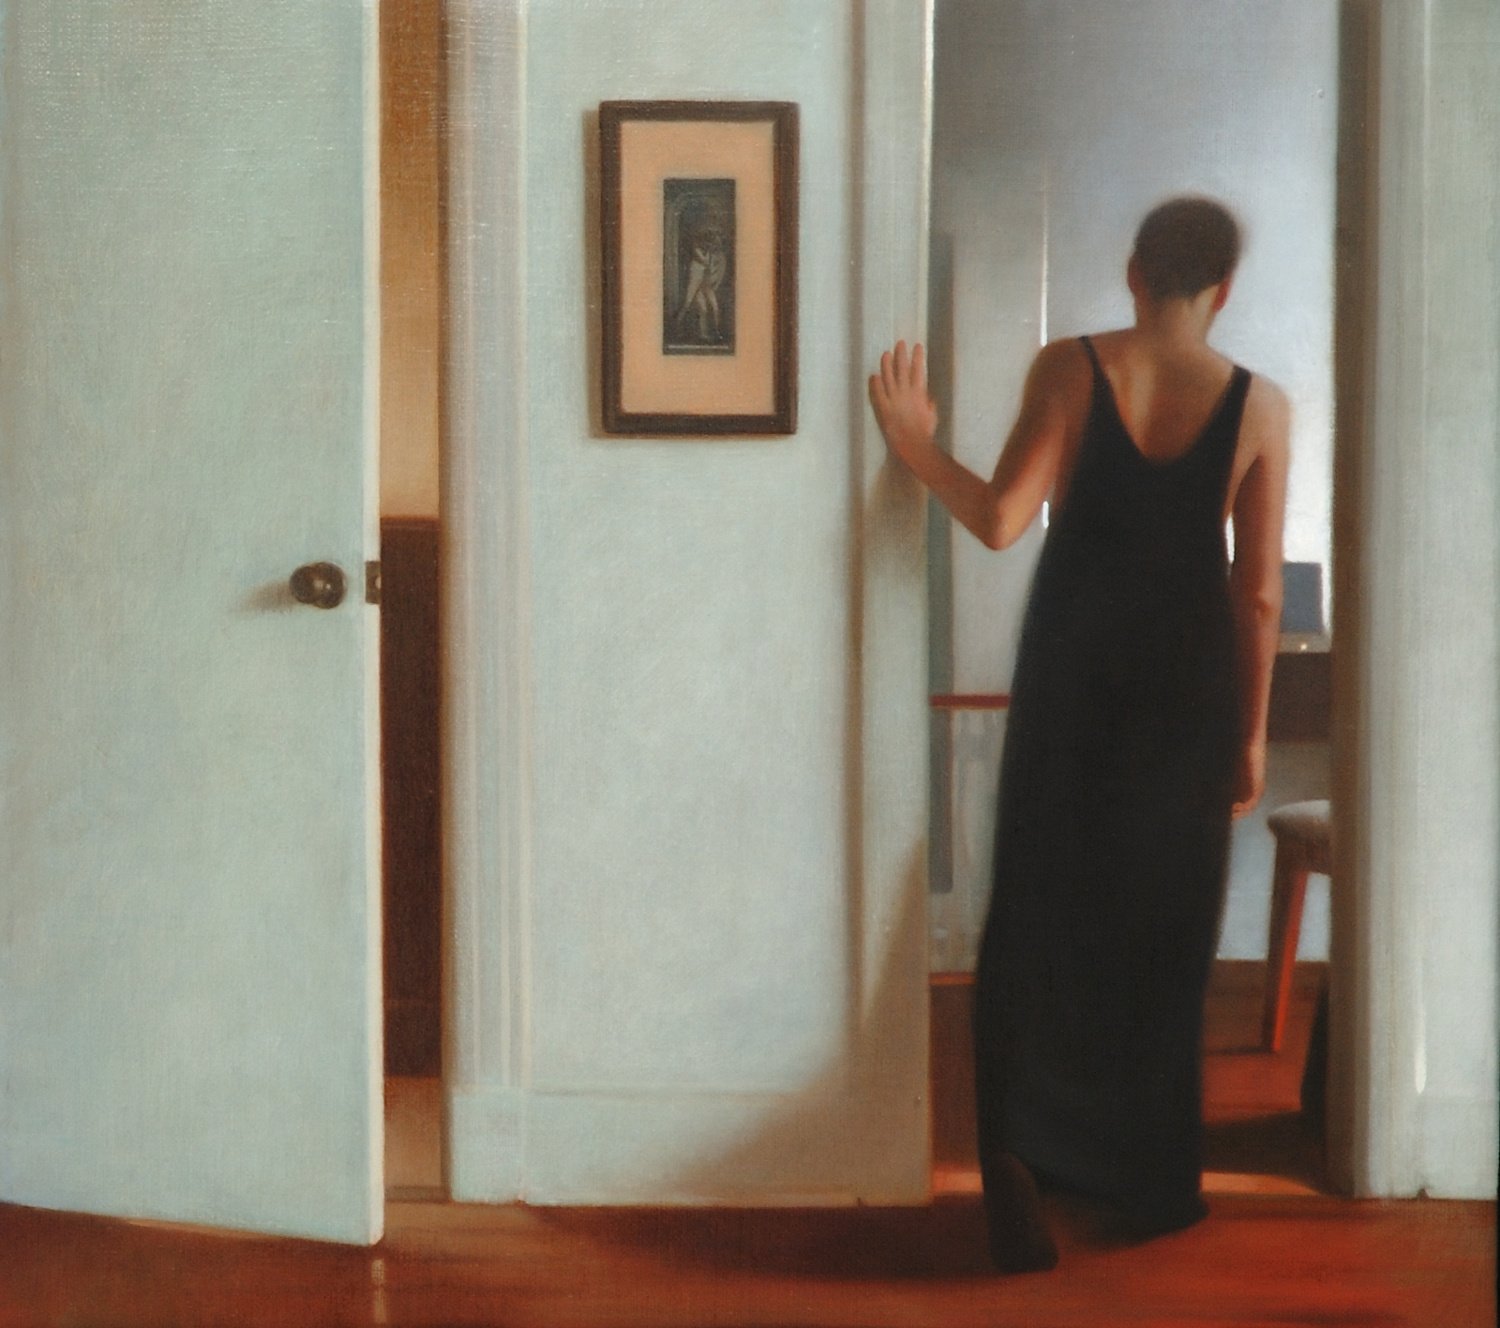   Walkabout , 2007, Oil on linen, 18 x 24 inches, Private collection 